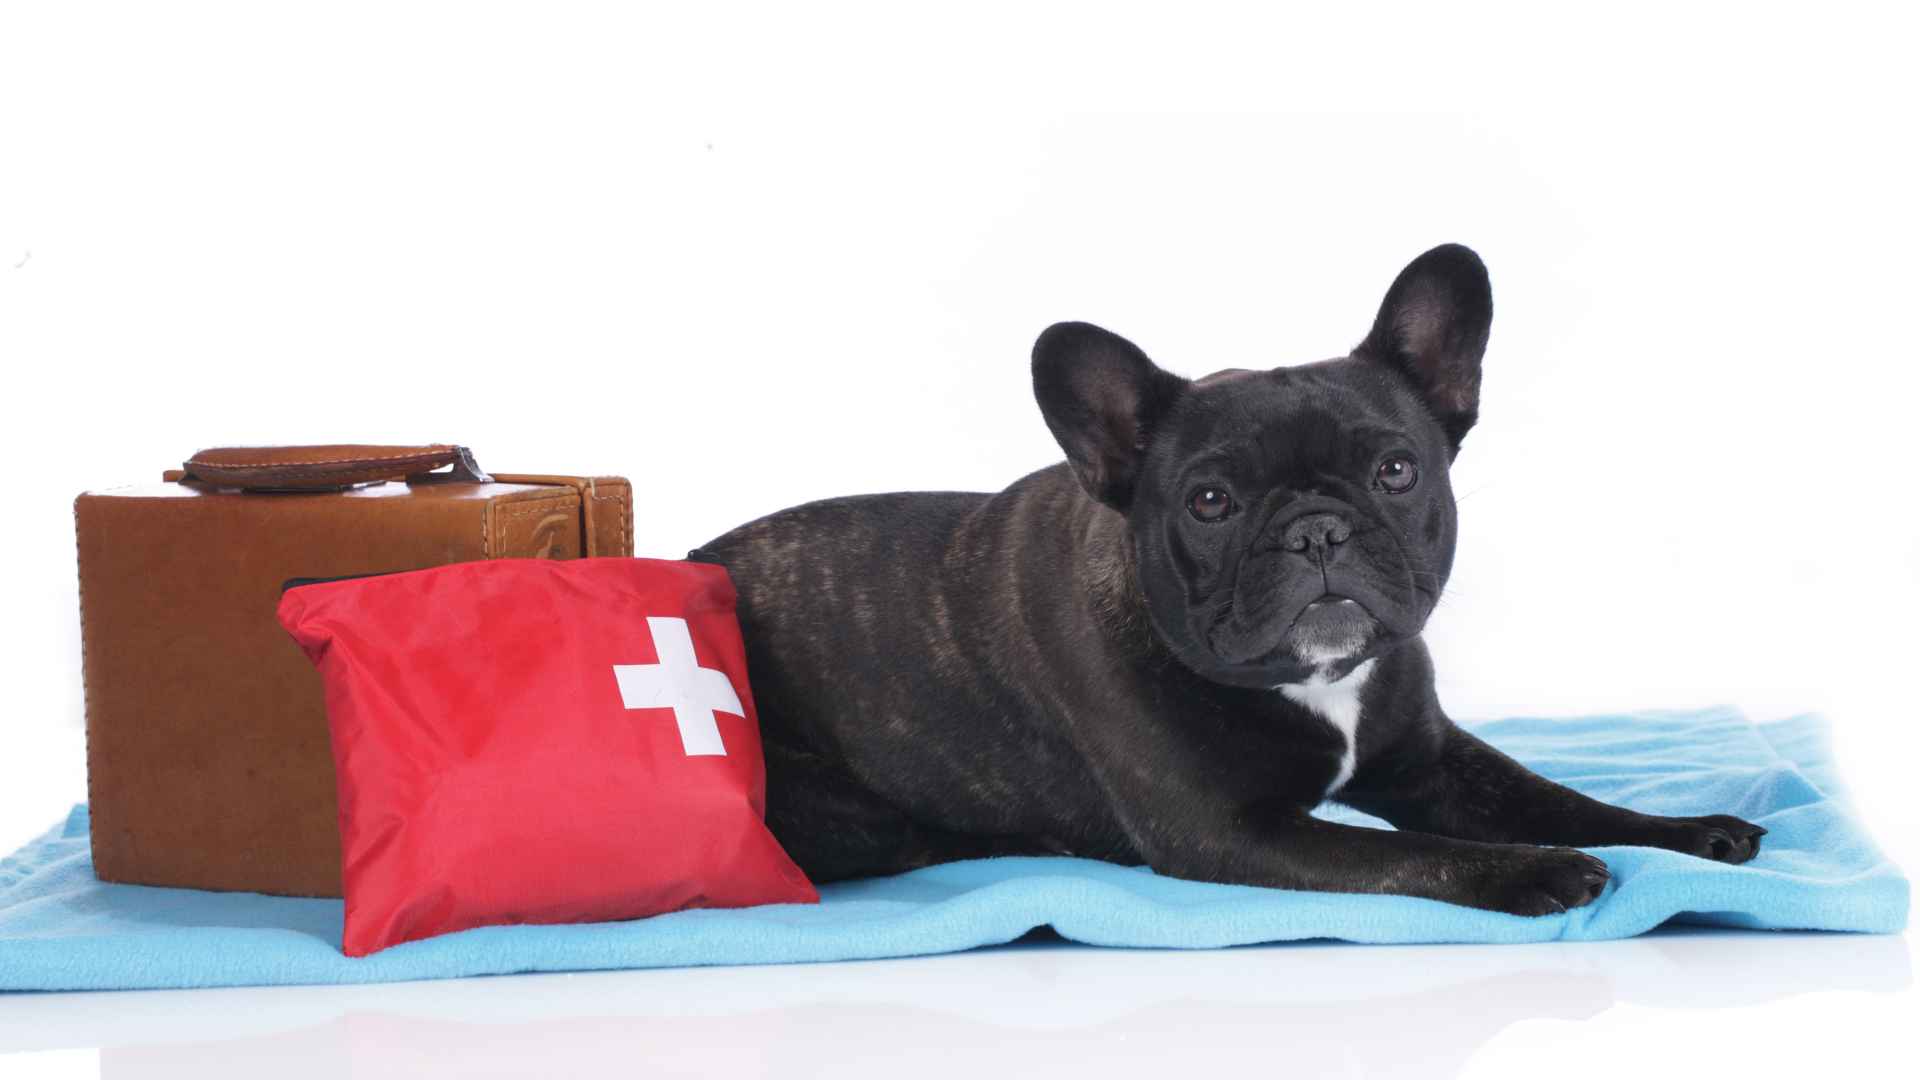 Black french bulldog with emergency case and suitcase lying on a blanket